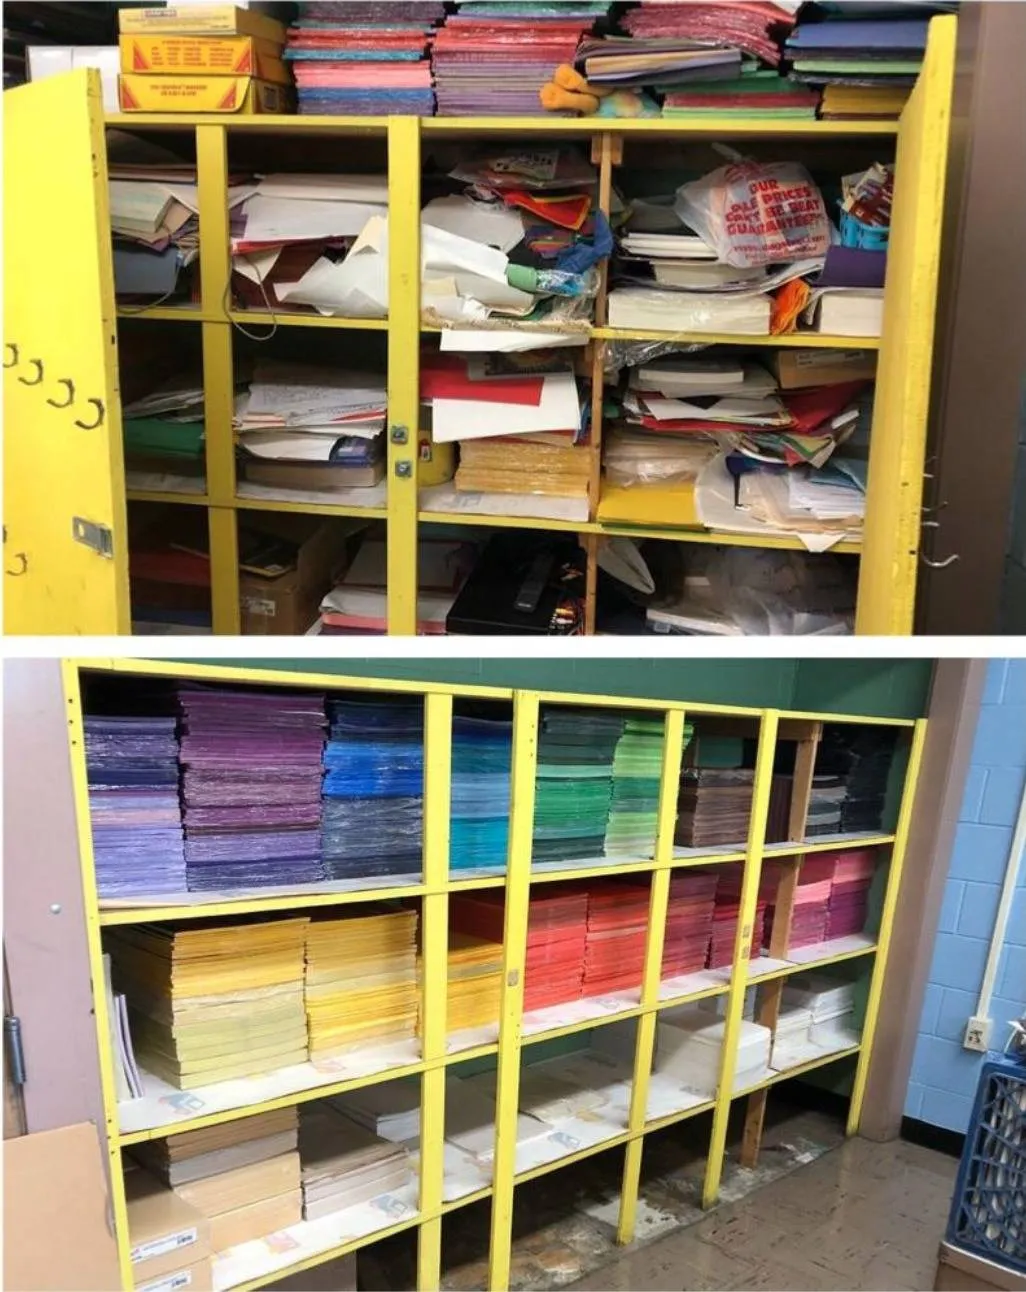 paper art supply closet reorganized into perfectly color-coded stacks